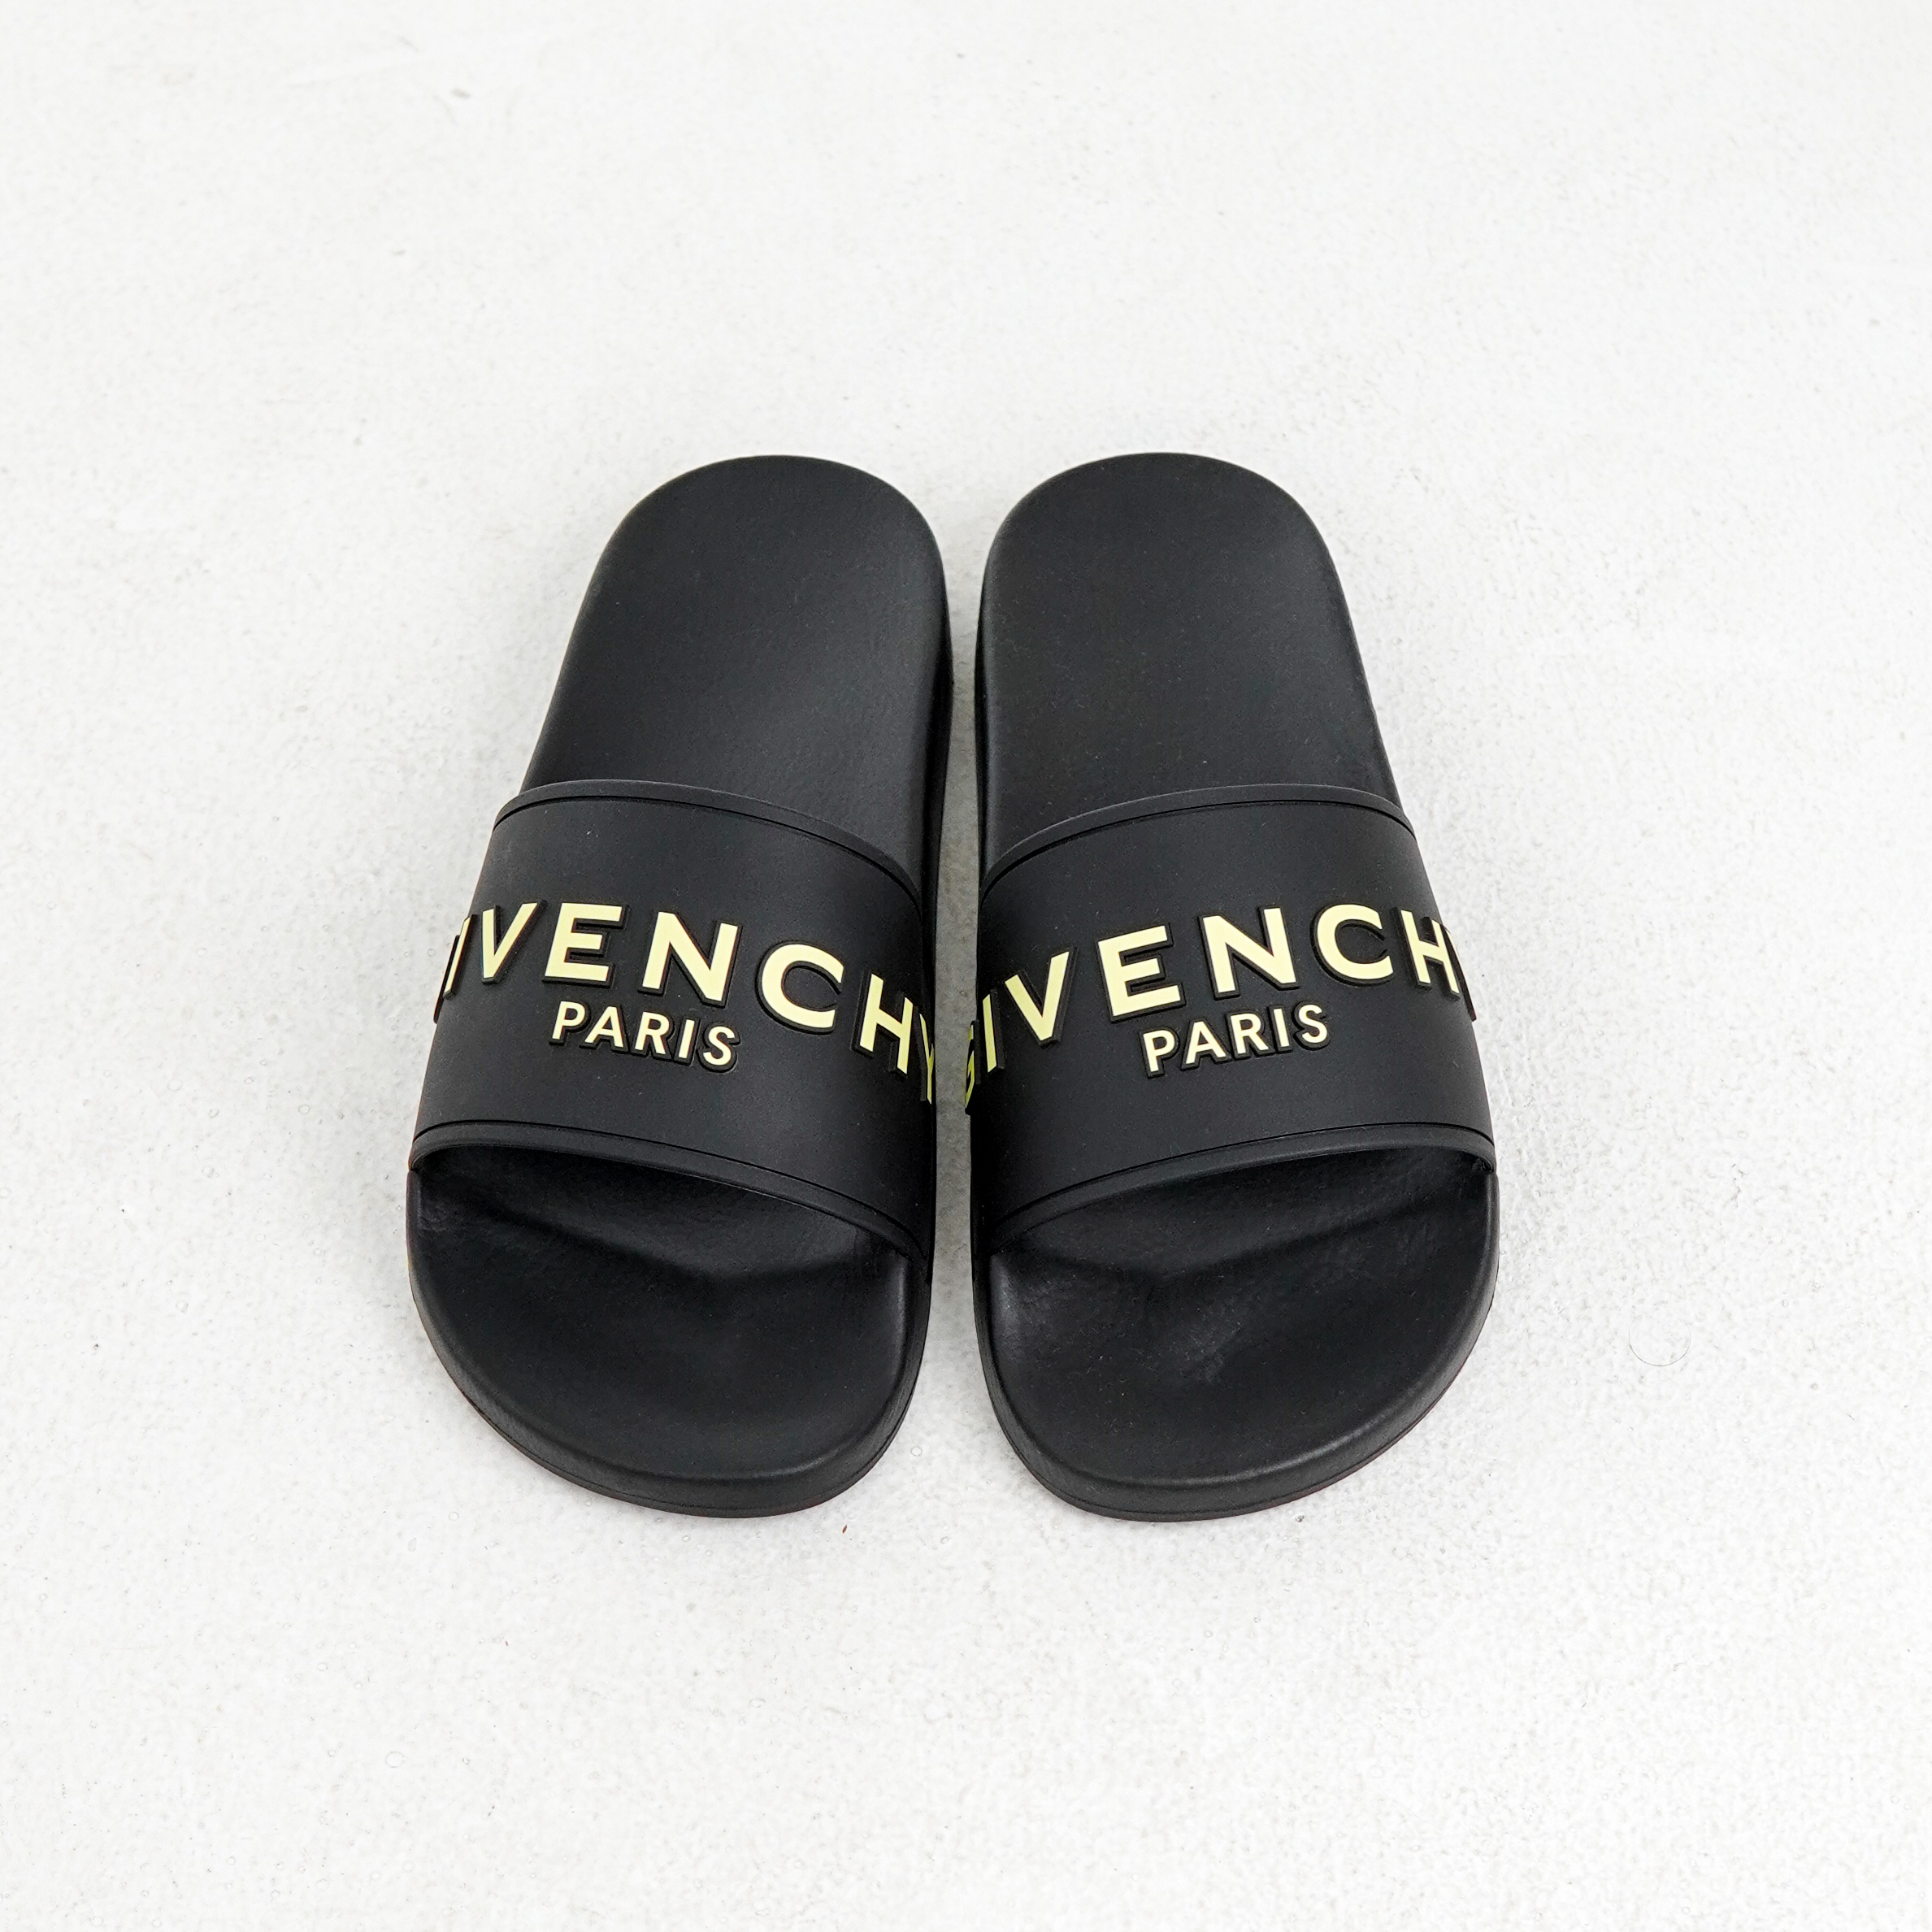 Sandal GIVENCHY CLASSIC LOGO TEXT YELLOW BLACK SLIDE 100% AUTHENTIC -  